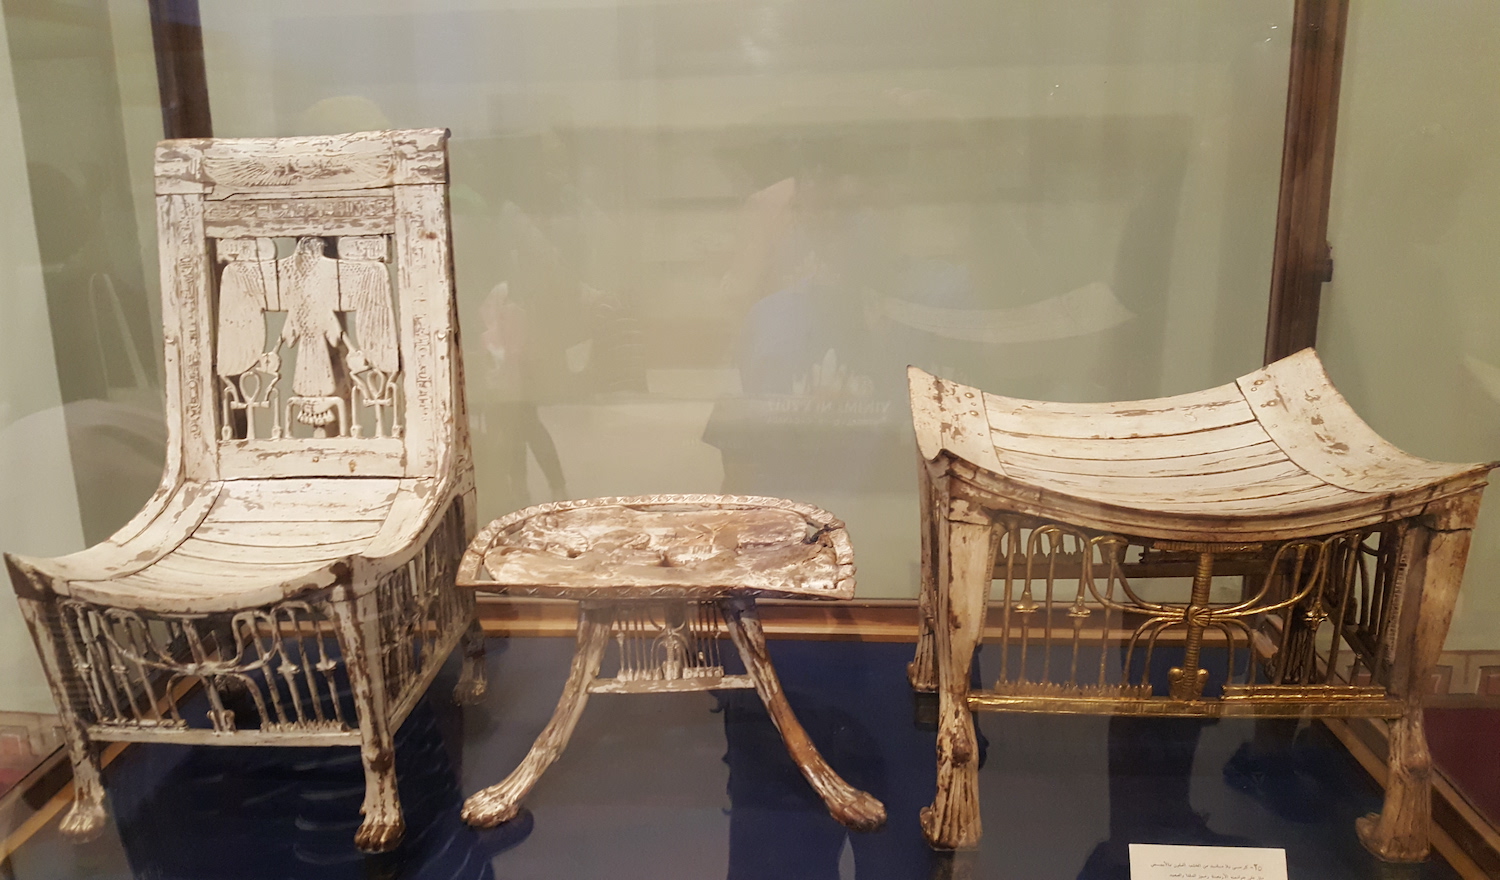 painted wood furniture - By_ovedc_-_Egyptian_Museum_(Cairo) King Tut's throne - white painted wood furniture